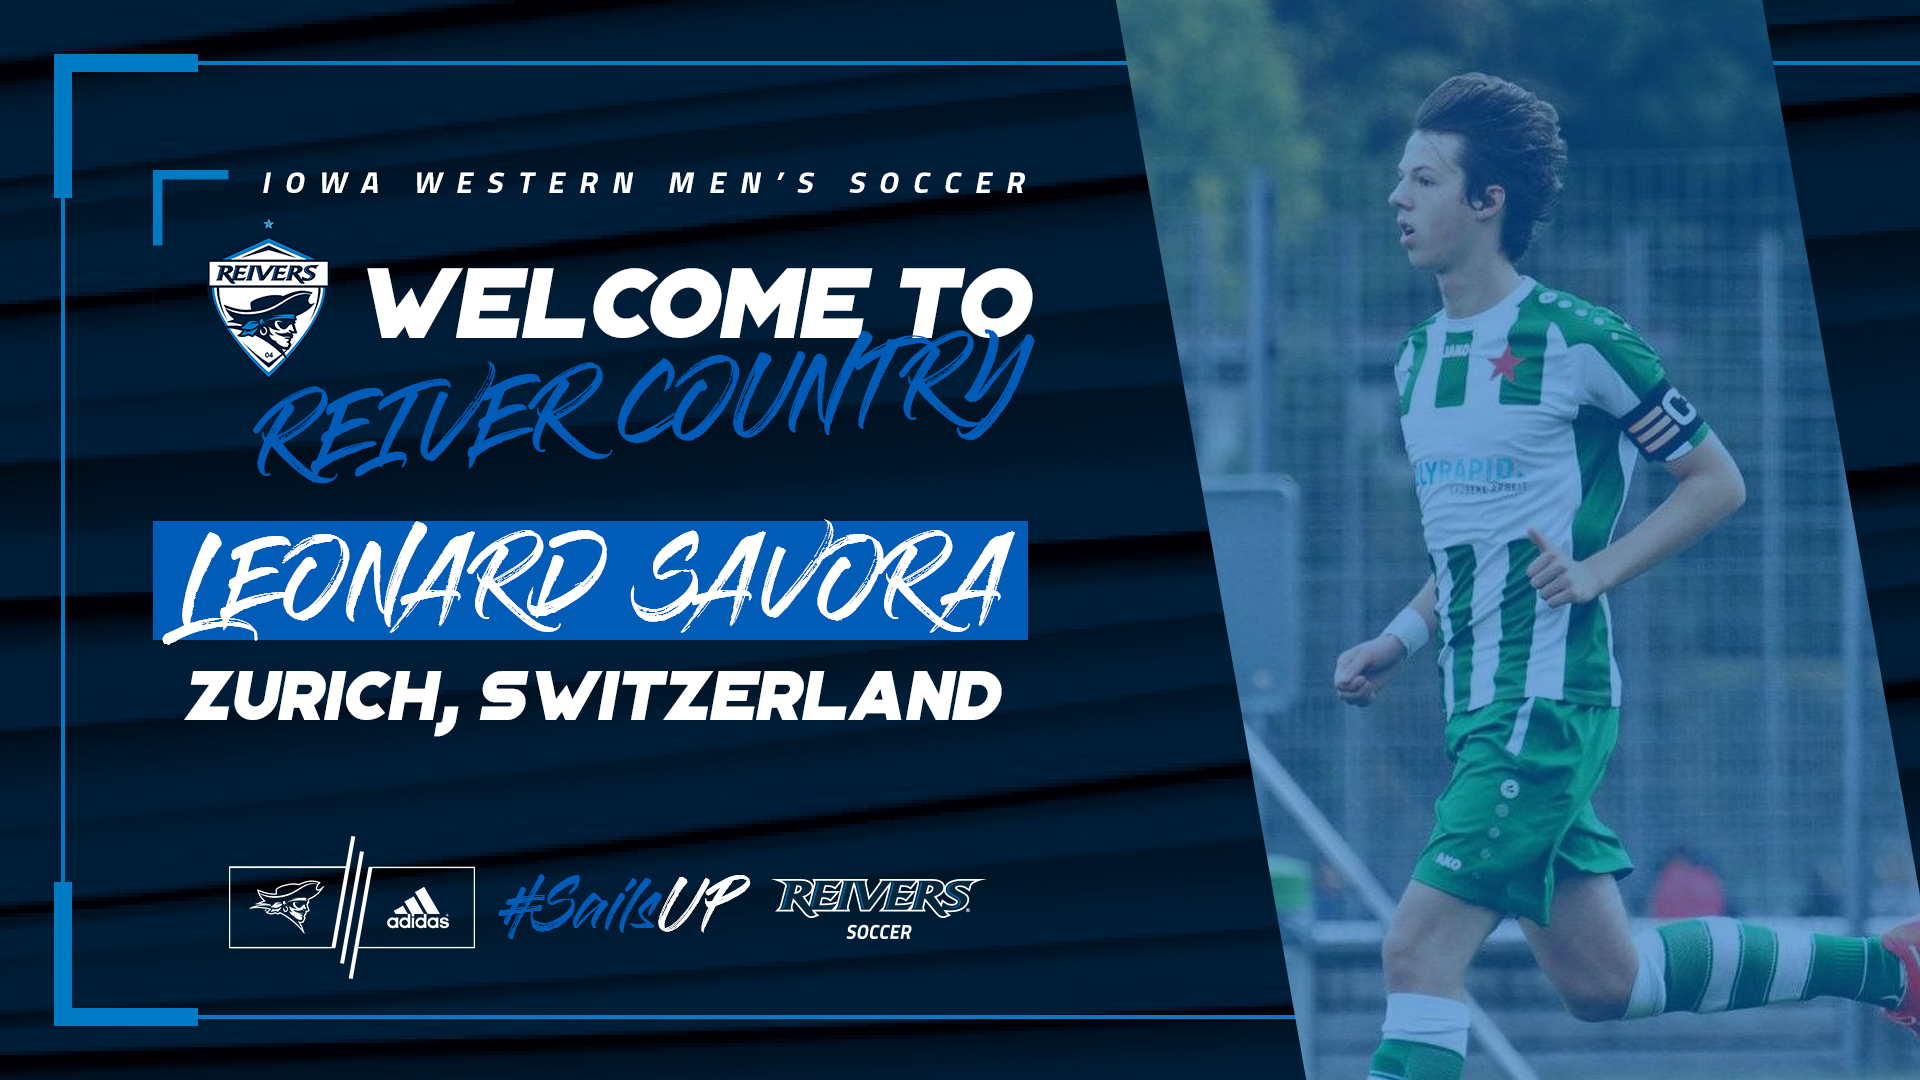 Leonard Savora has joined the Reivers for spring of 2019